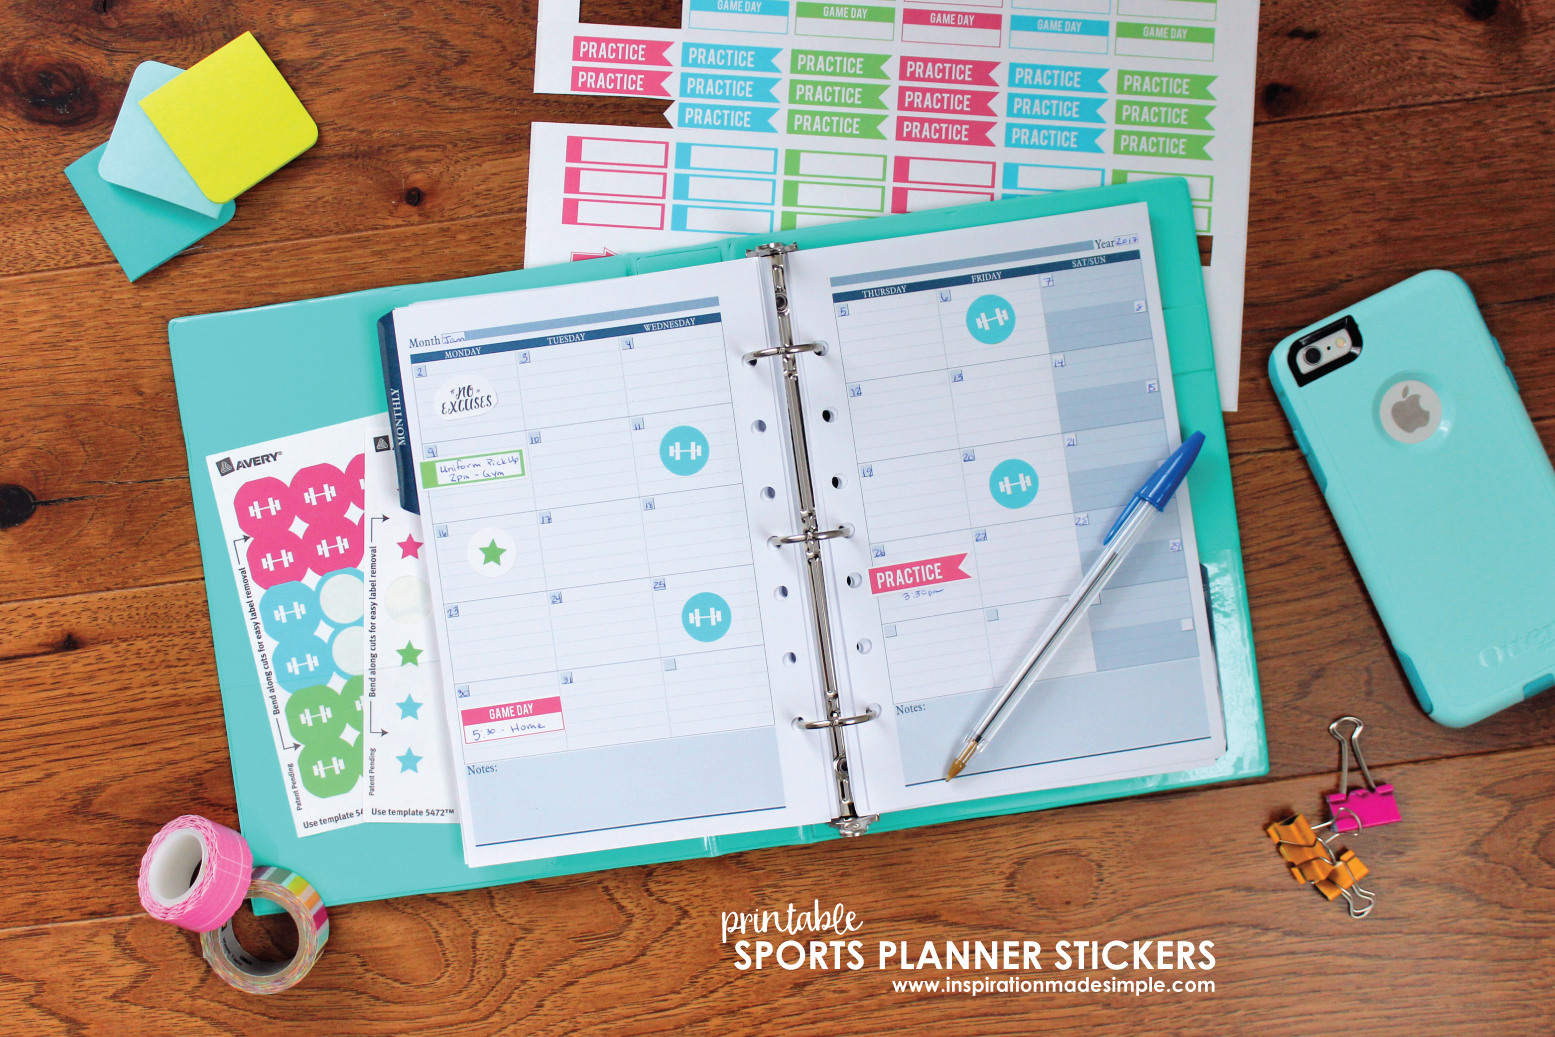 Printable Sports Planner Stickers